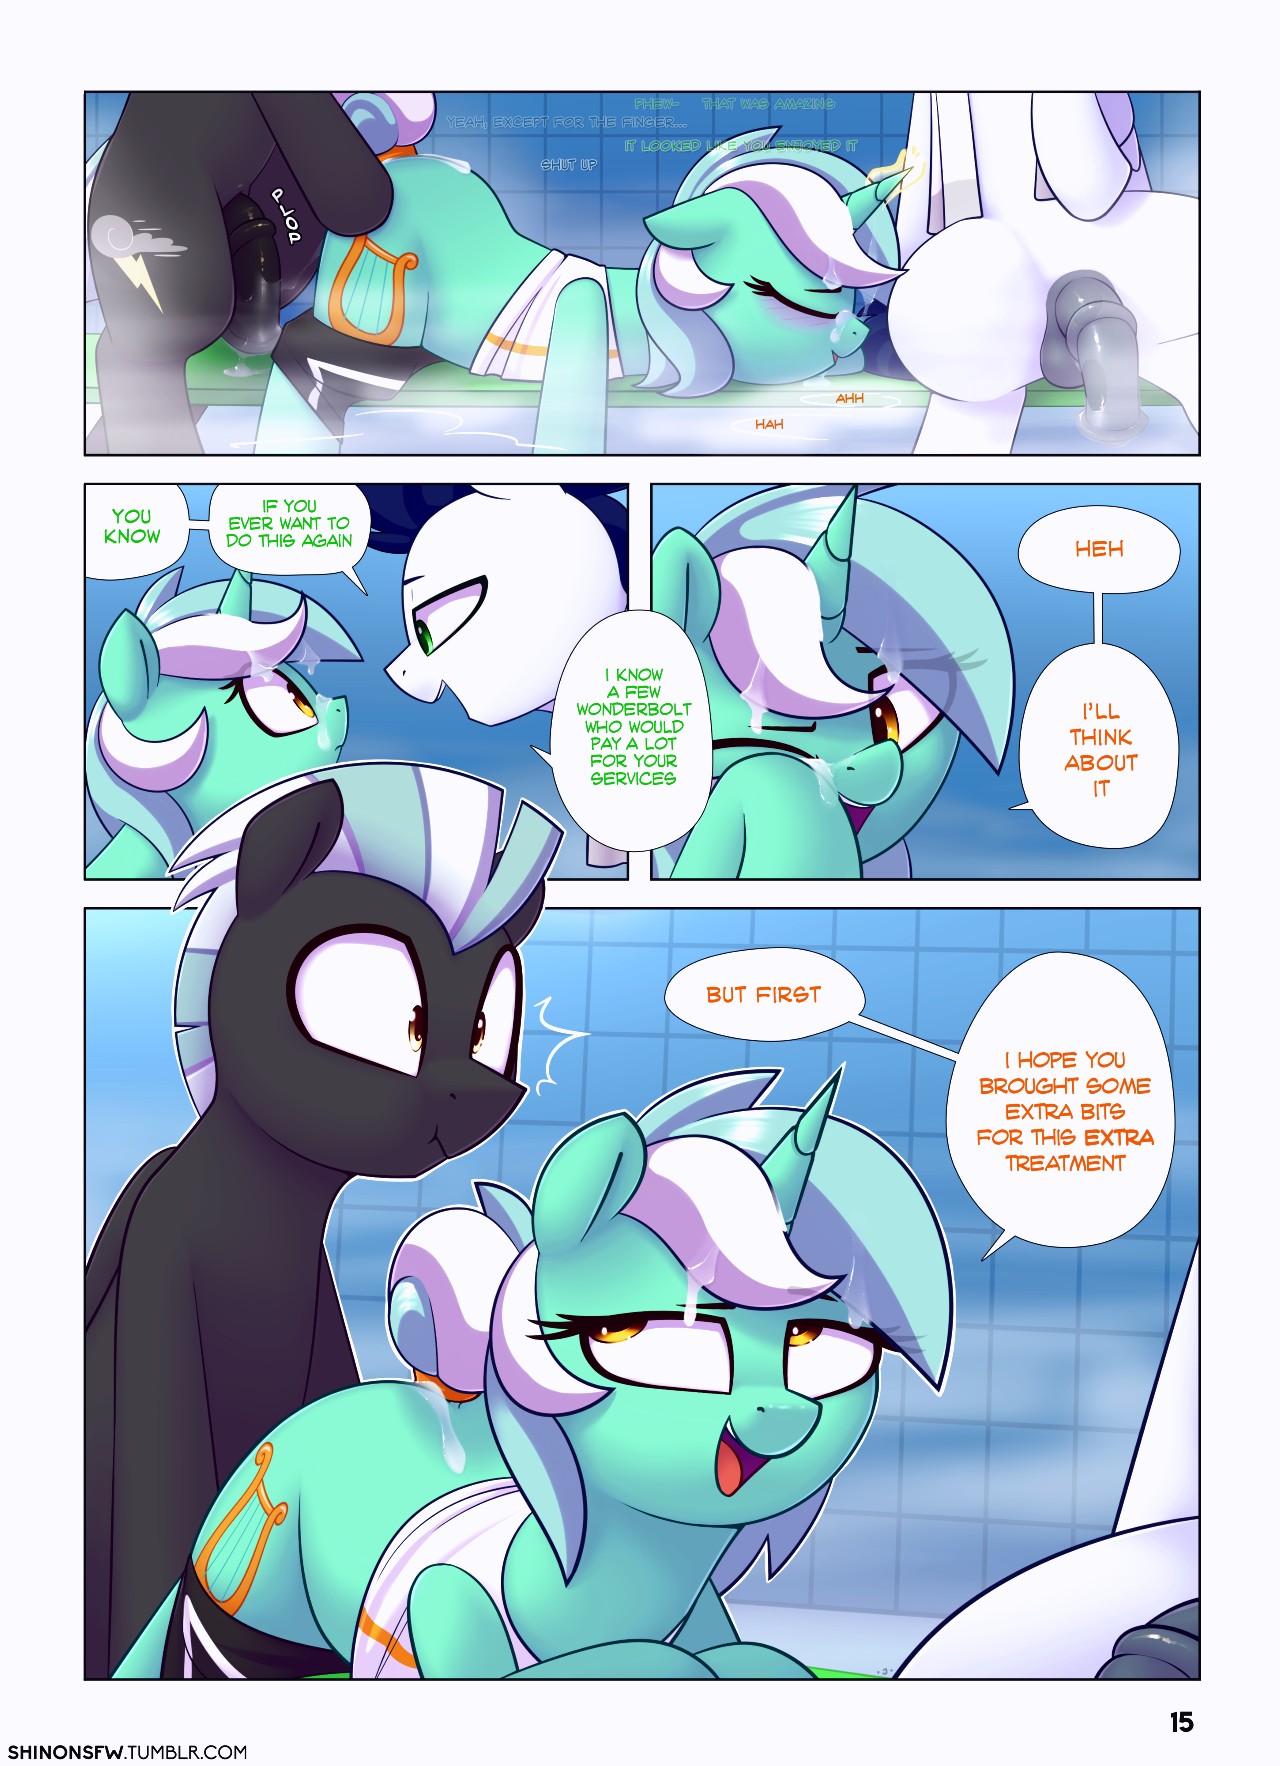 Magic Touch 2 porn comic page 01 on category My Little Pony